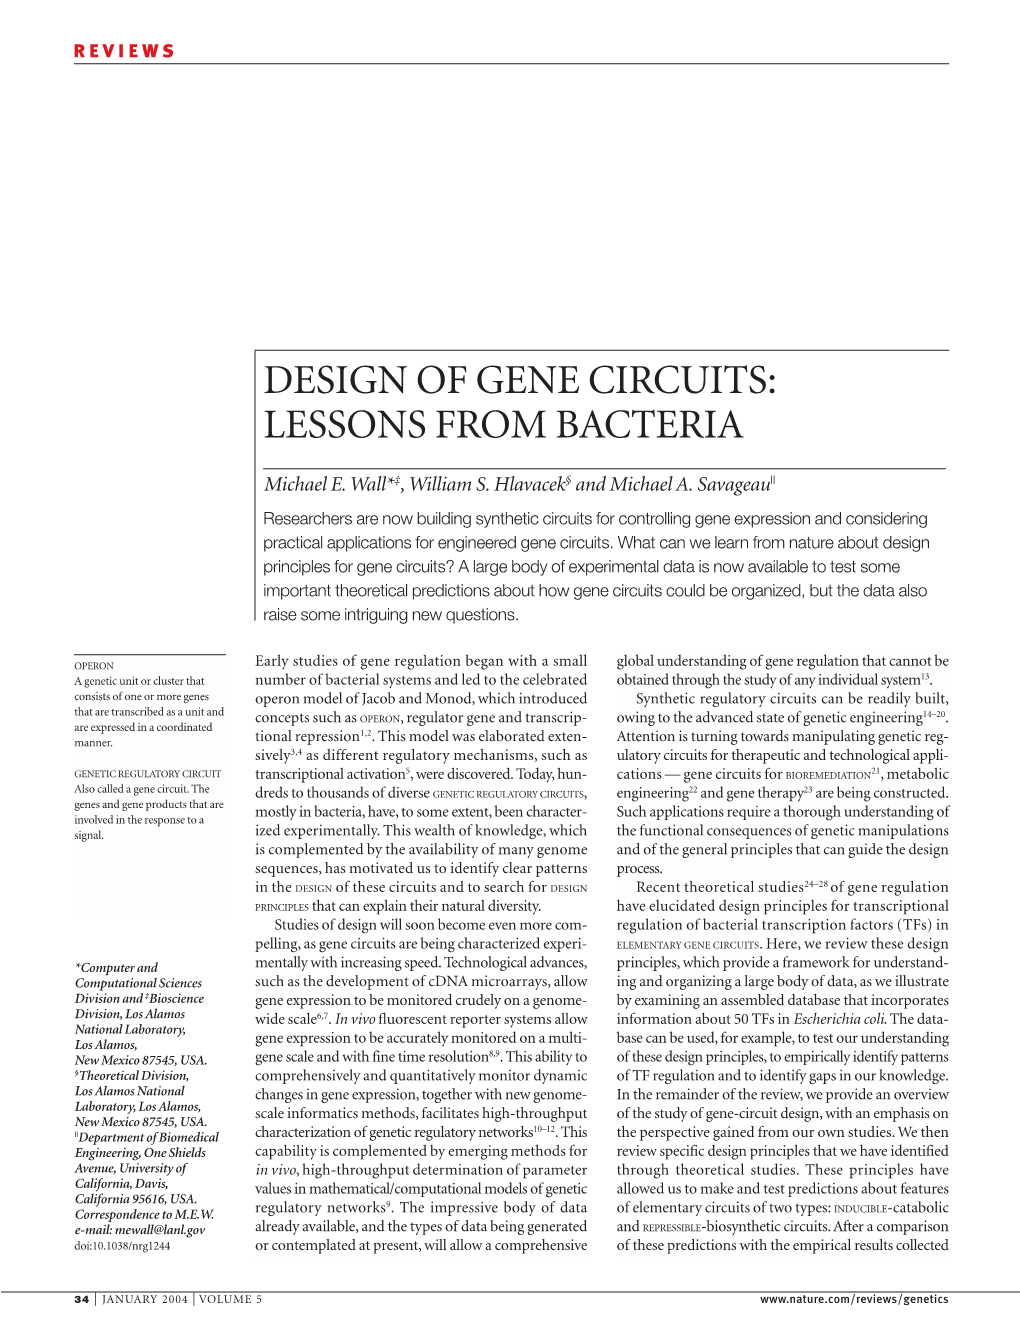 Design of Gene Circuits: Lessons from Bacteria